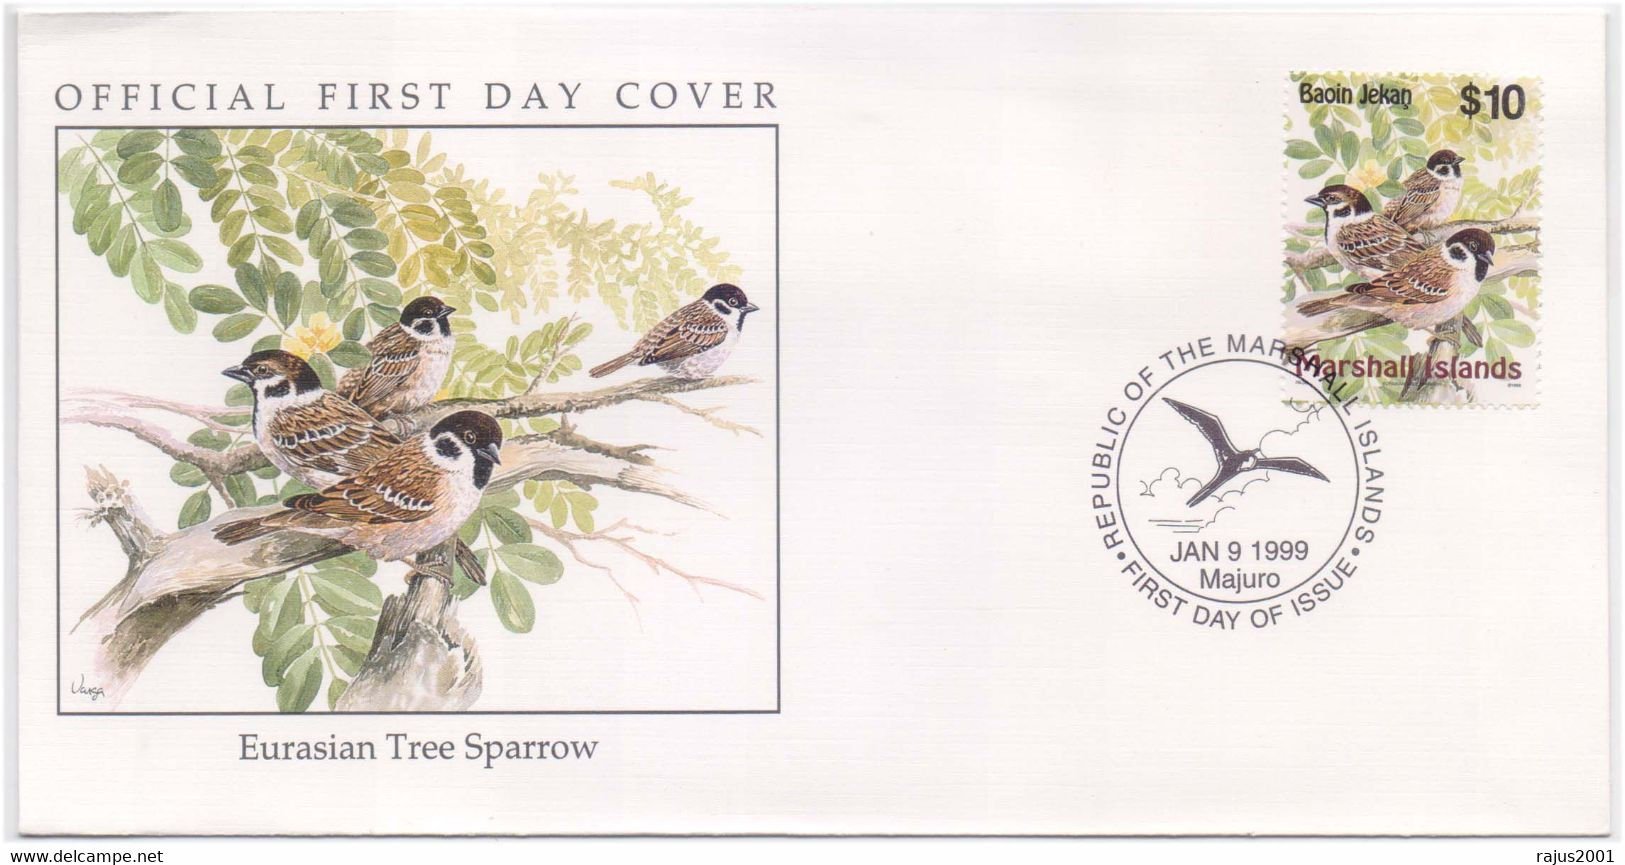 Eurasian Tree Sparrow Bird, Found In Towns & Villages Birds Animal Pictorial Cancellation Marshall HIGH VALUE STAMP FDC - Moineaux